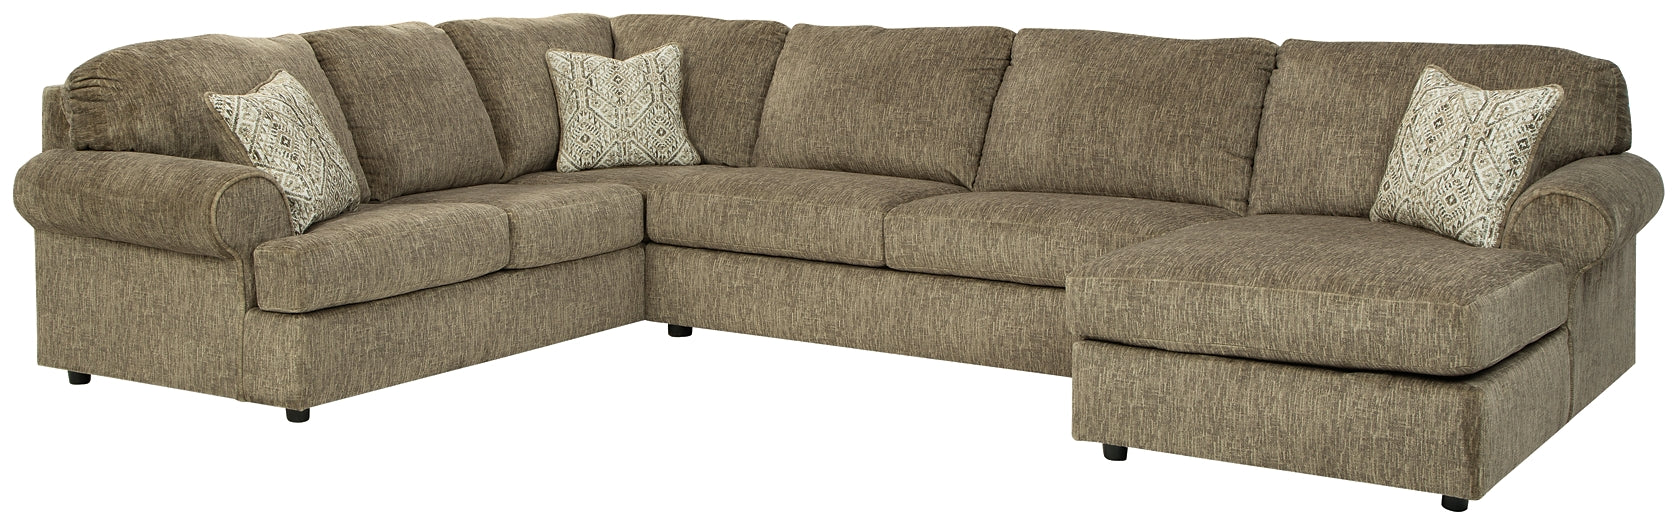 Hoylake 3-Piece Sectional with Chaise JB's Furniture  Home Furniture, Home Decor, Furniture Store